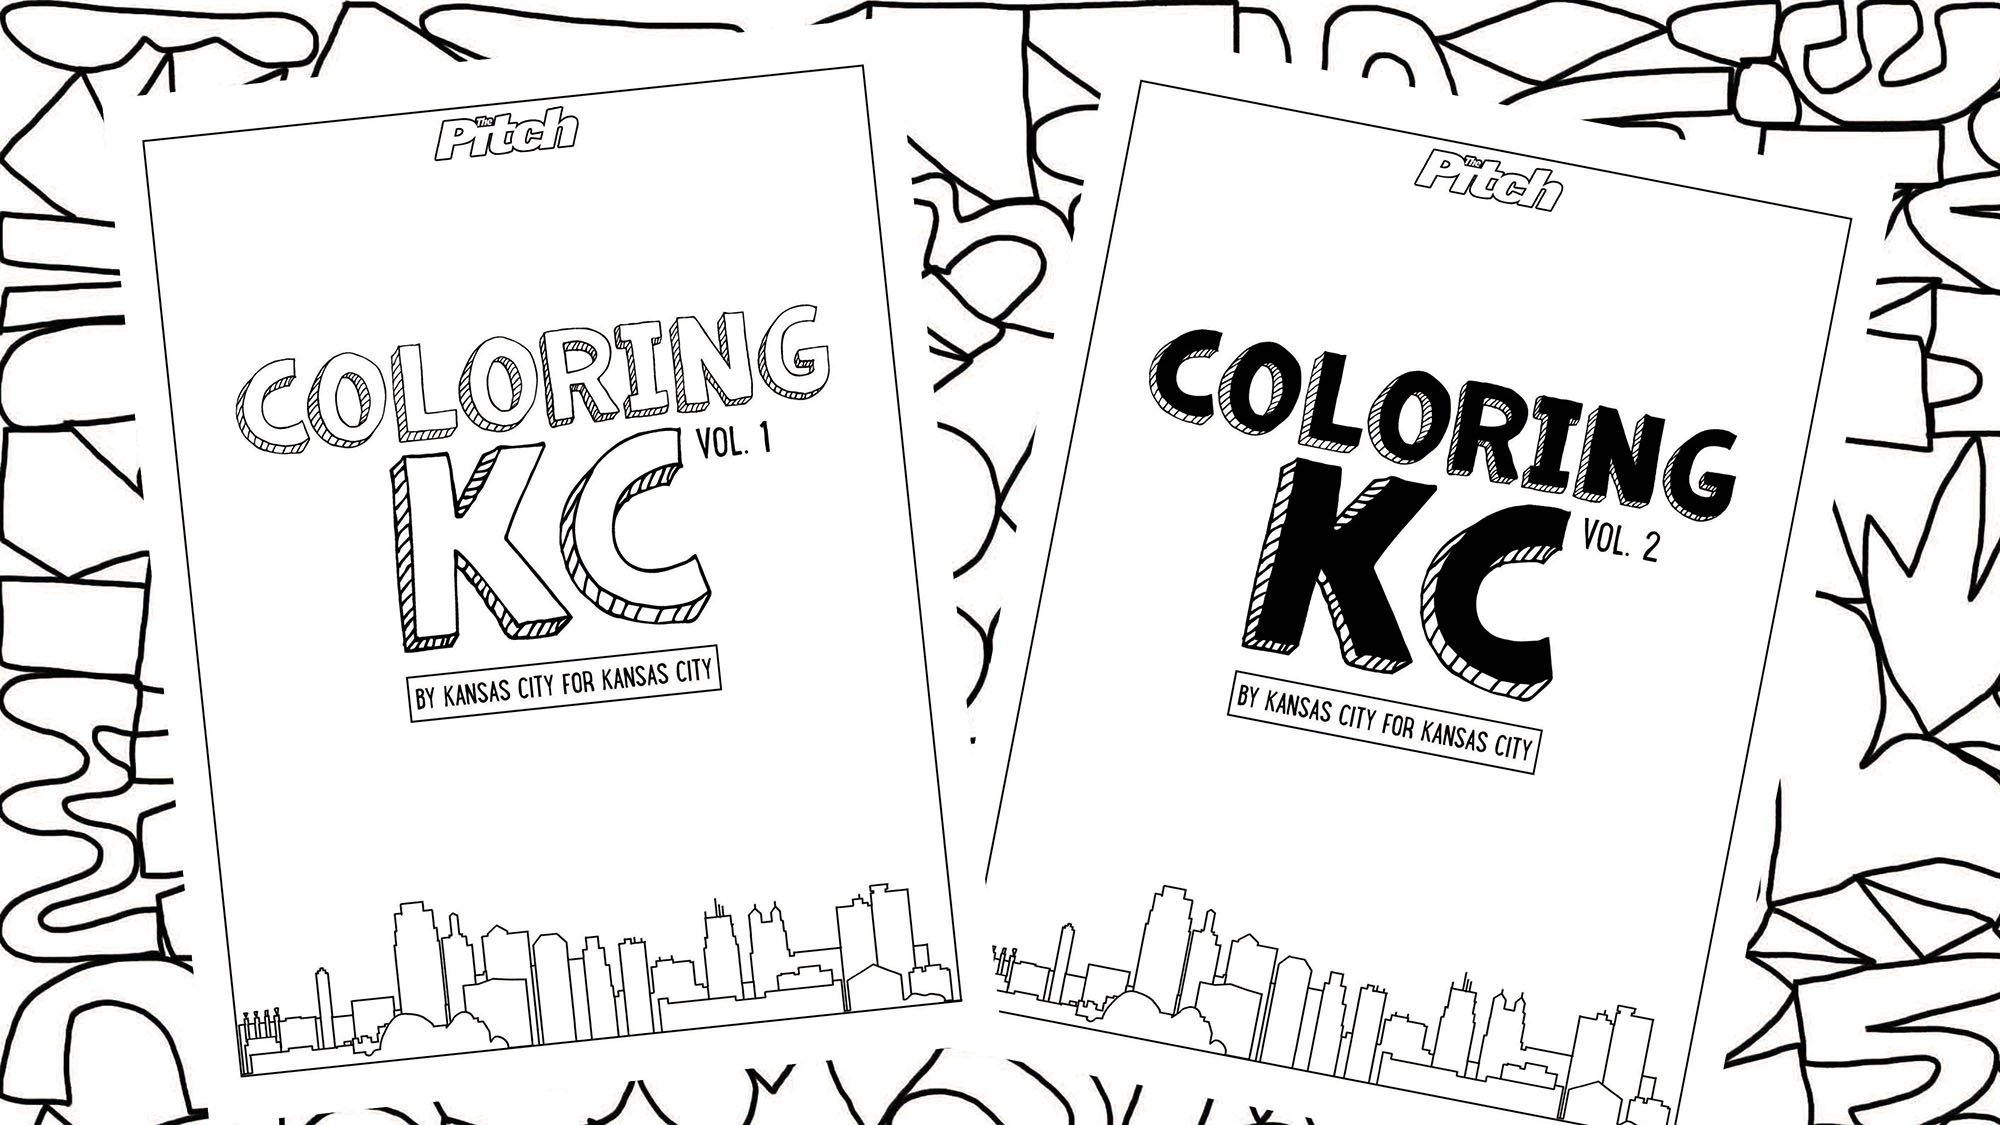 The pitch releases a digital coloring book made by over local artists